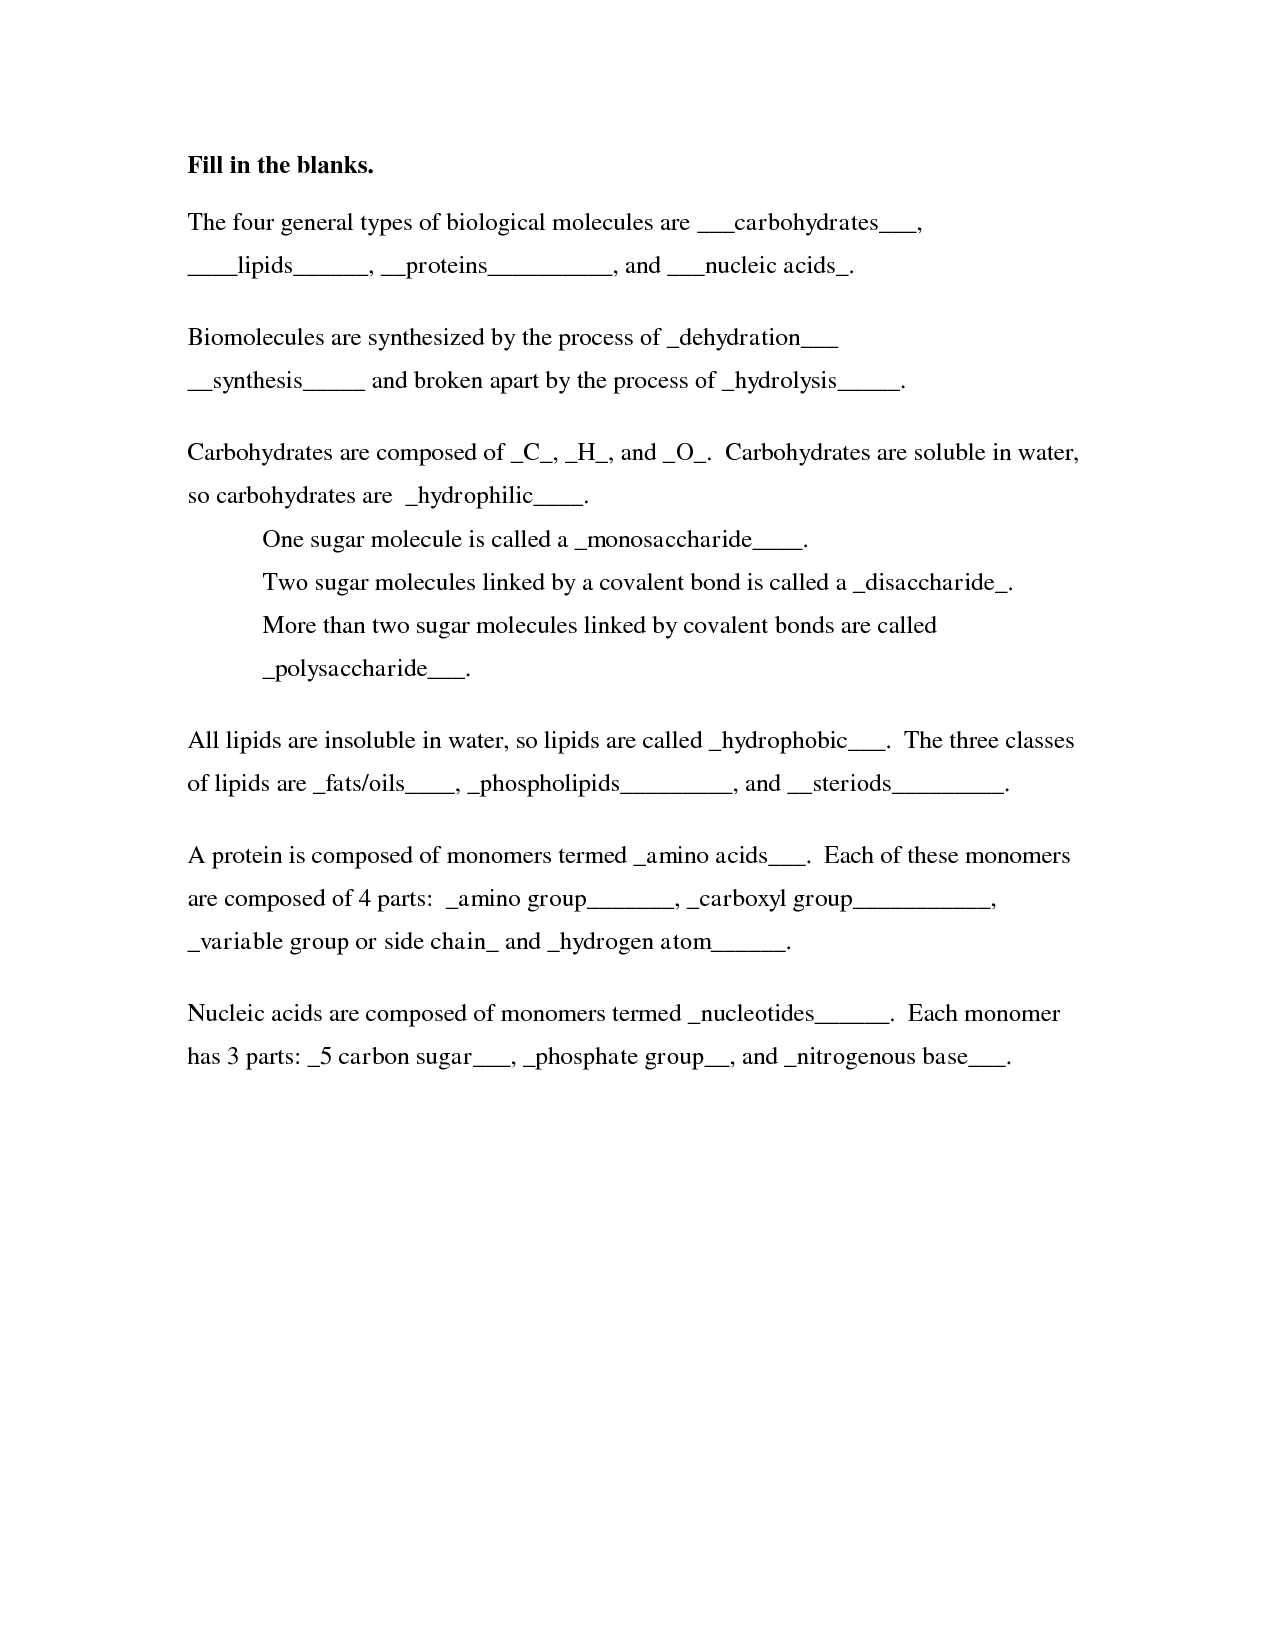 Carbohydrates Lipids and Proteins Worksheet Image